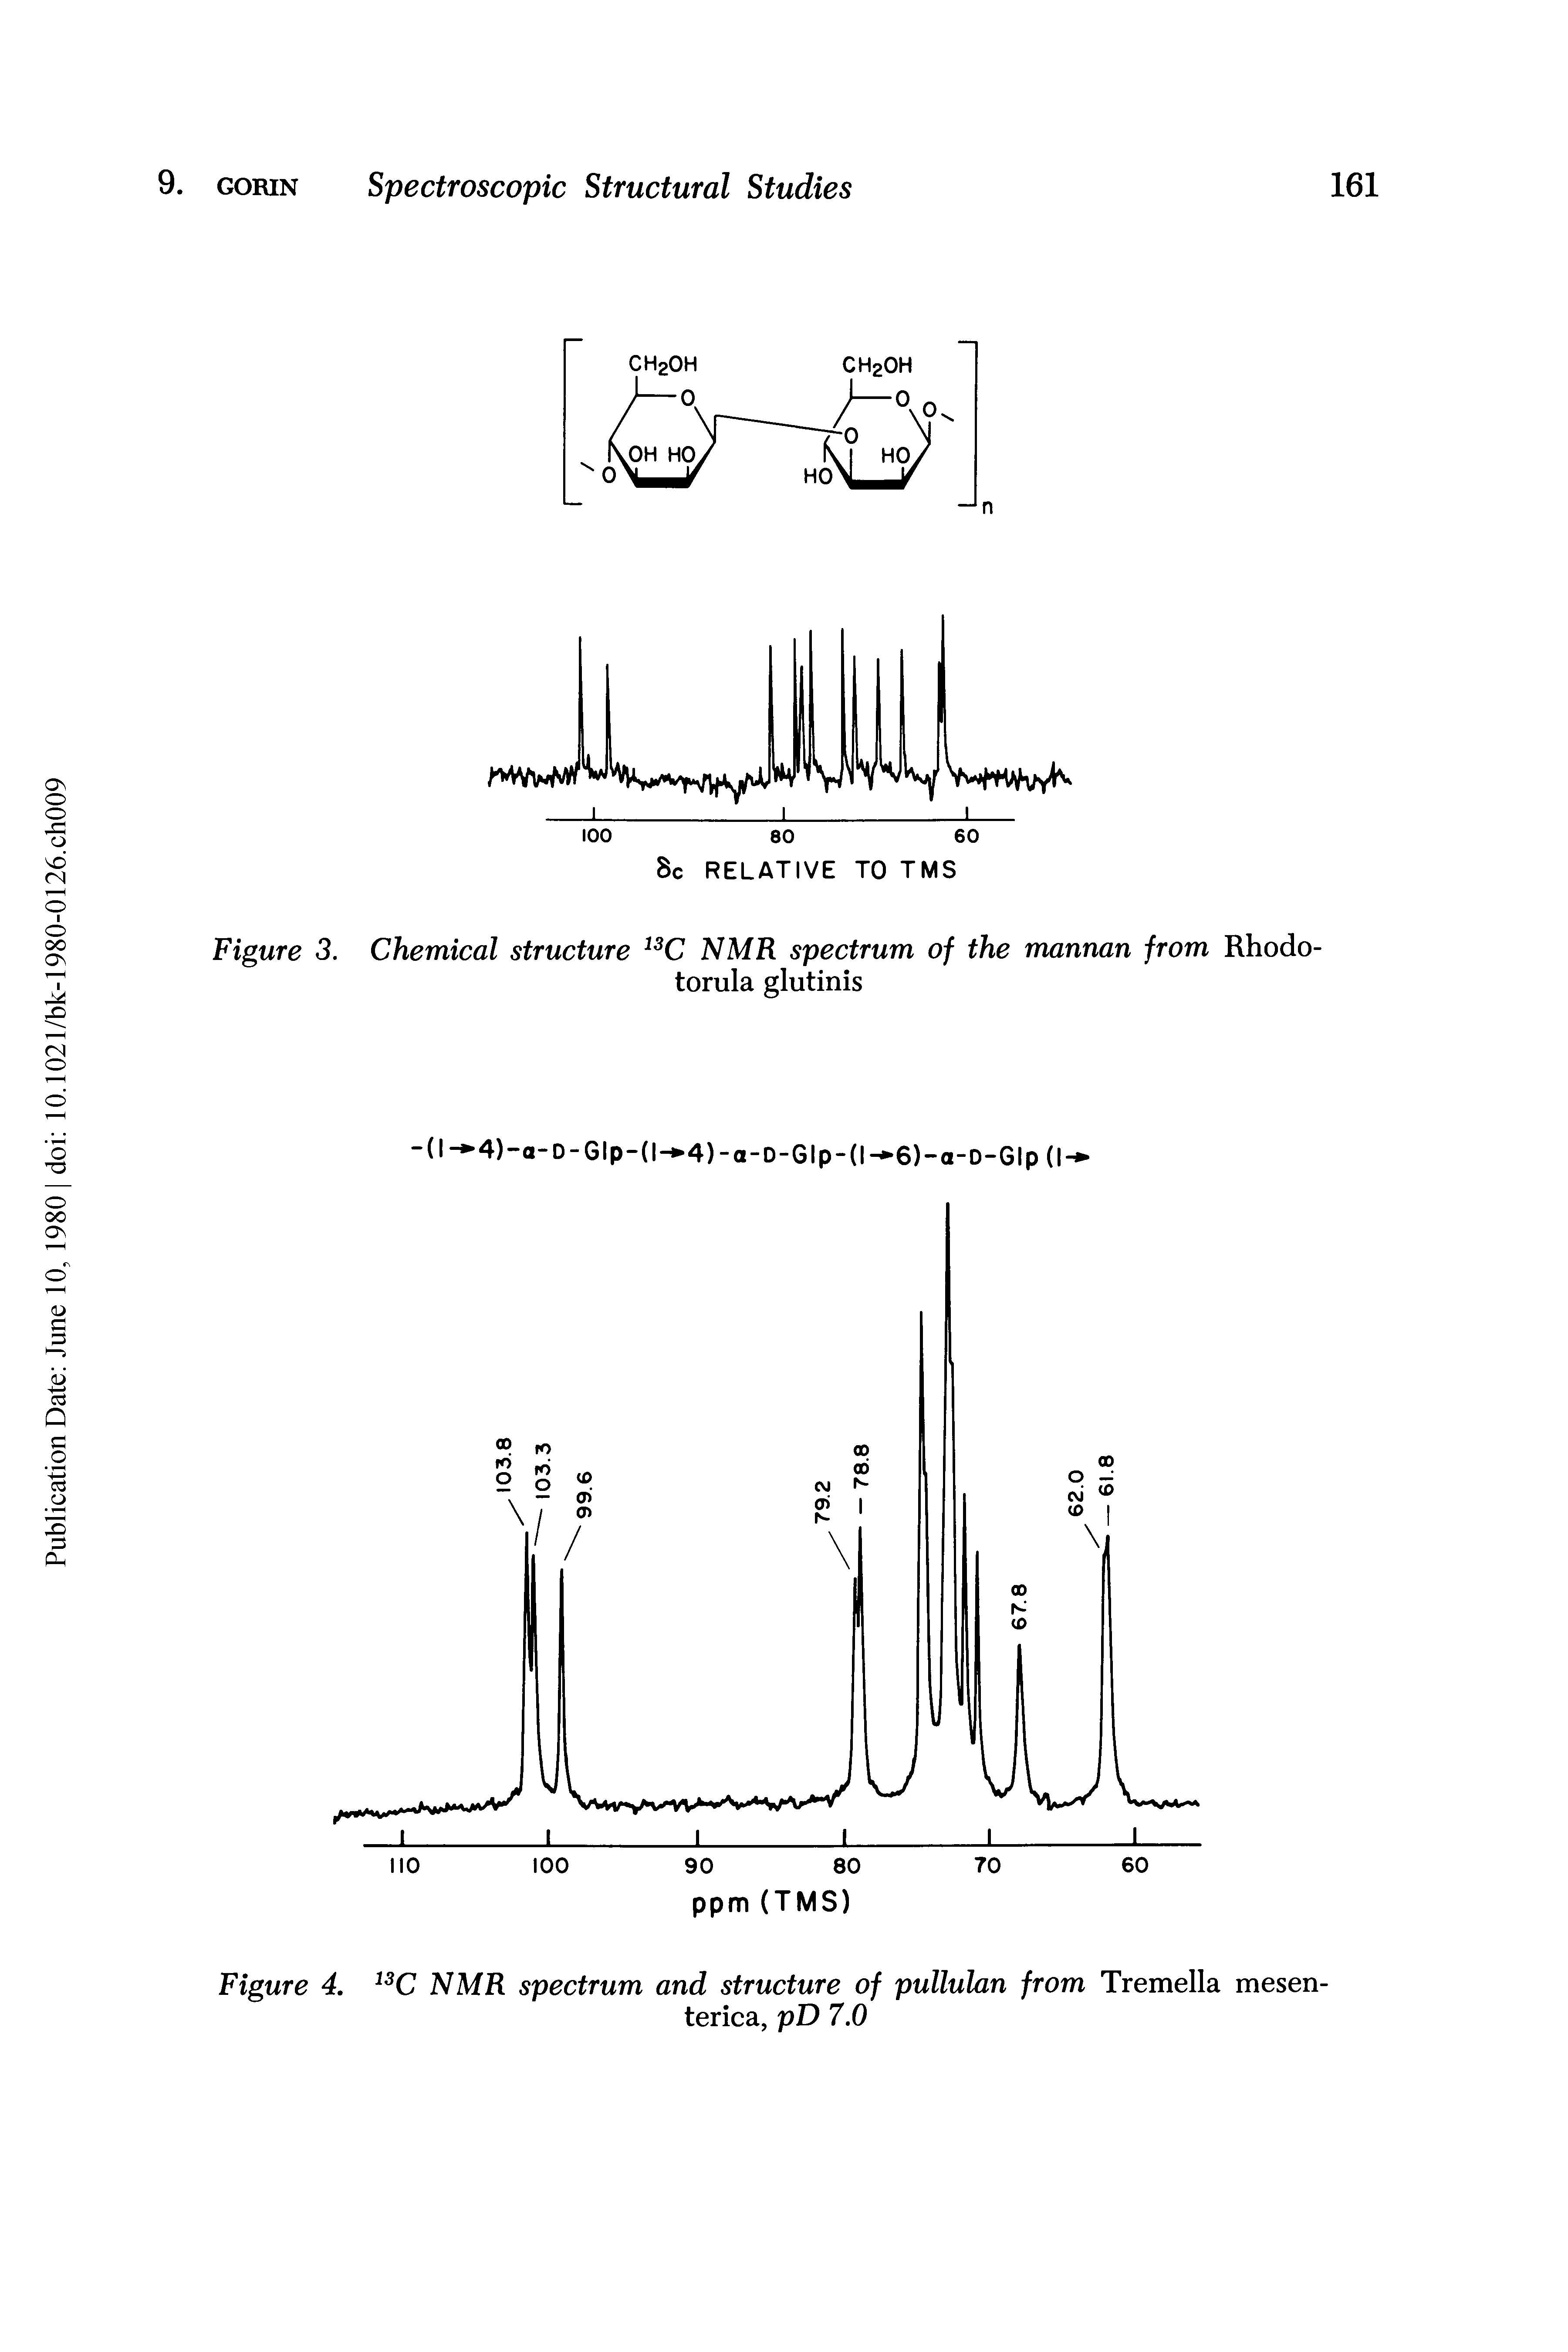 Figure 3. Chemical structure NMR spectrum of the mannan from Rhodo-...